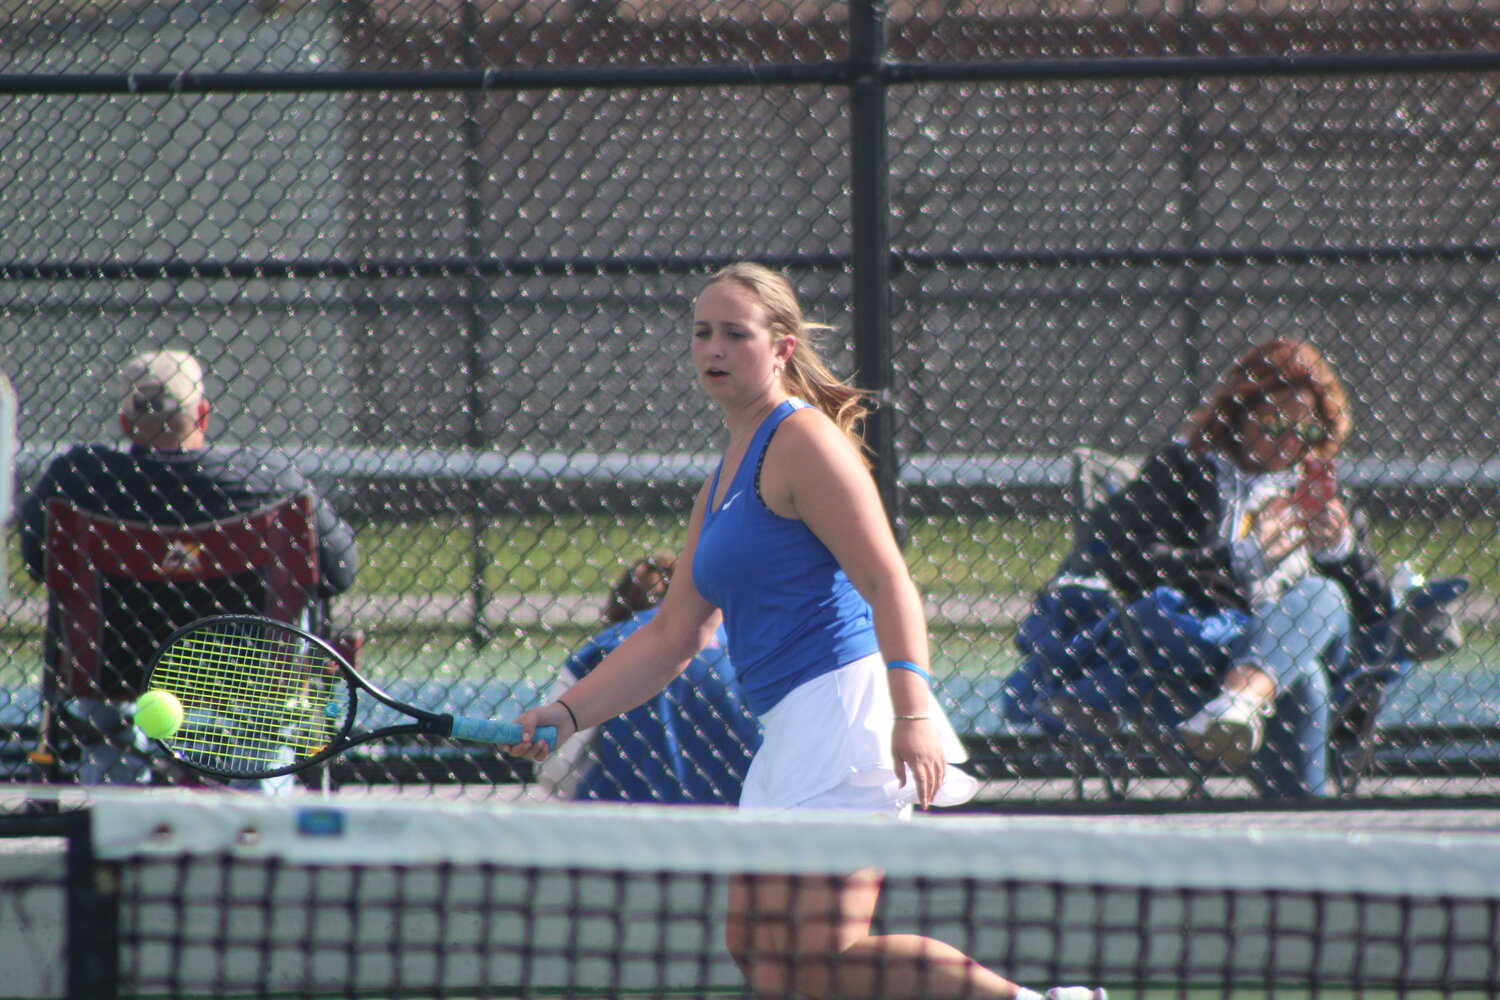 Sam Rohr anchors the No. 1 singles spot in her senior season for the Athenians.